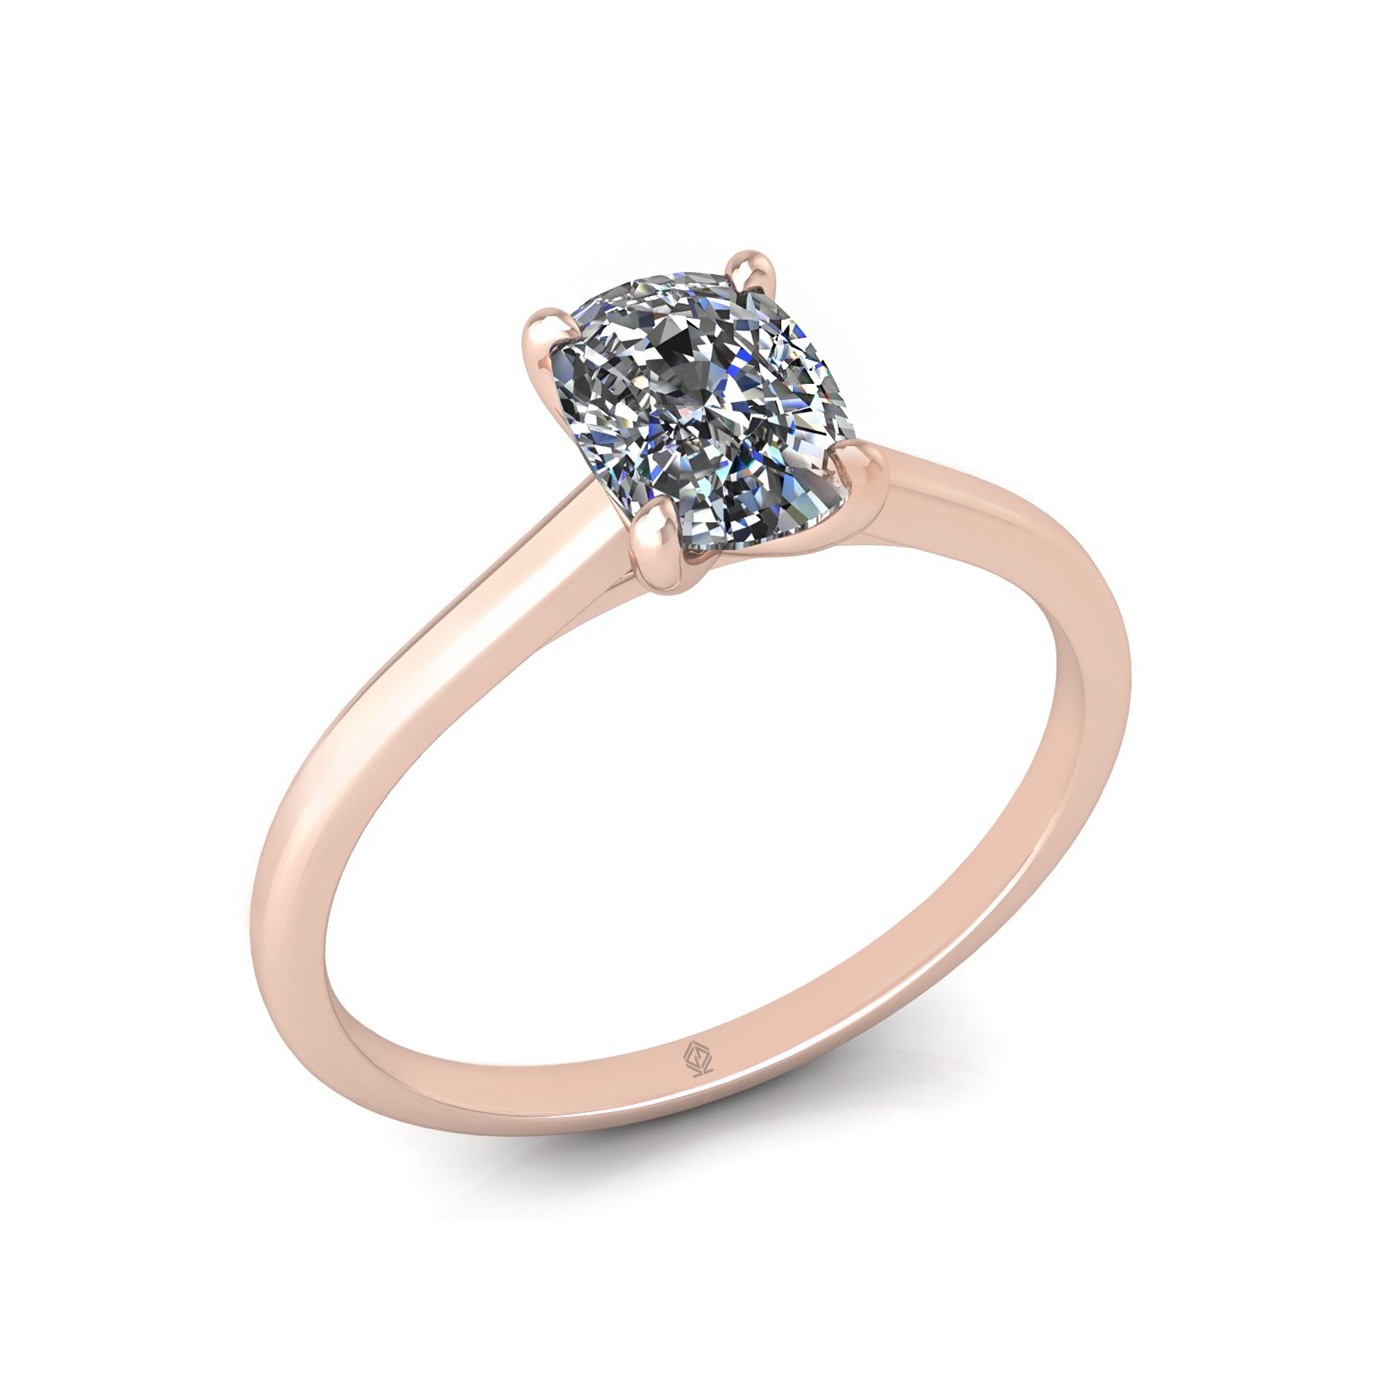 18k rose gold 1,20 ct 4 prongs solitaire elongated cushion cut diamond engagement ring with whisper thin band Photos & images